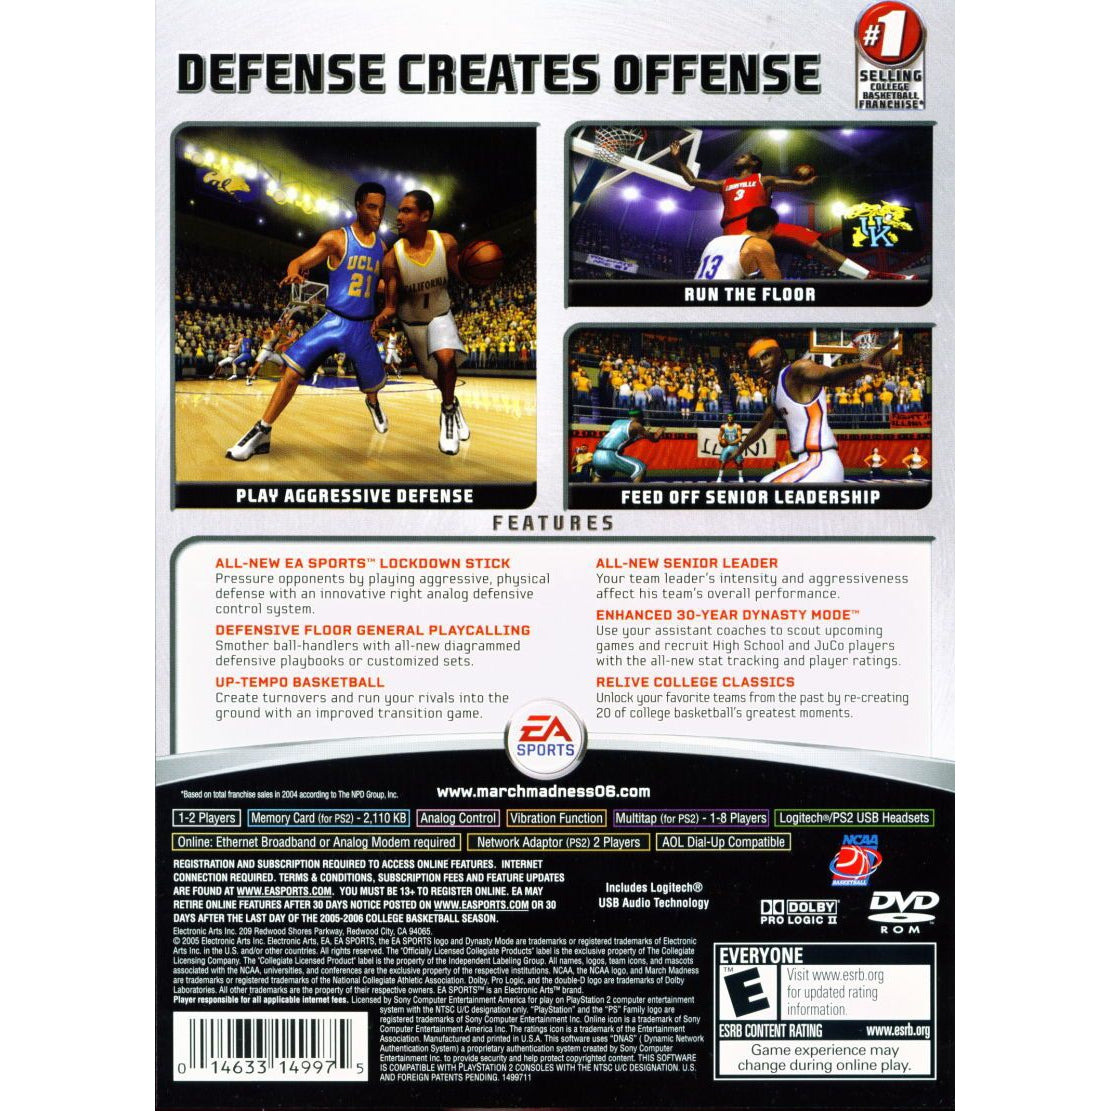 NCAA March Madness 06 - PlayStation 2 (PS2) Game Complete - YourGamingShop.com - Buy, Sell, Trade Video Games Online. 120 Day Warranty. Satisfaction Guaranteed.